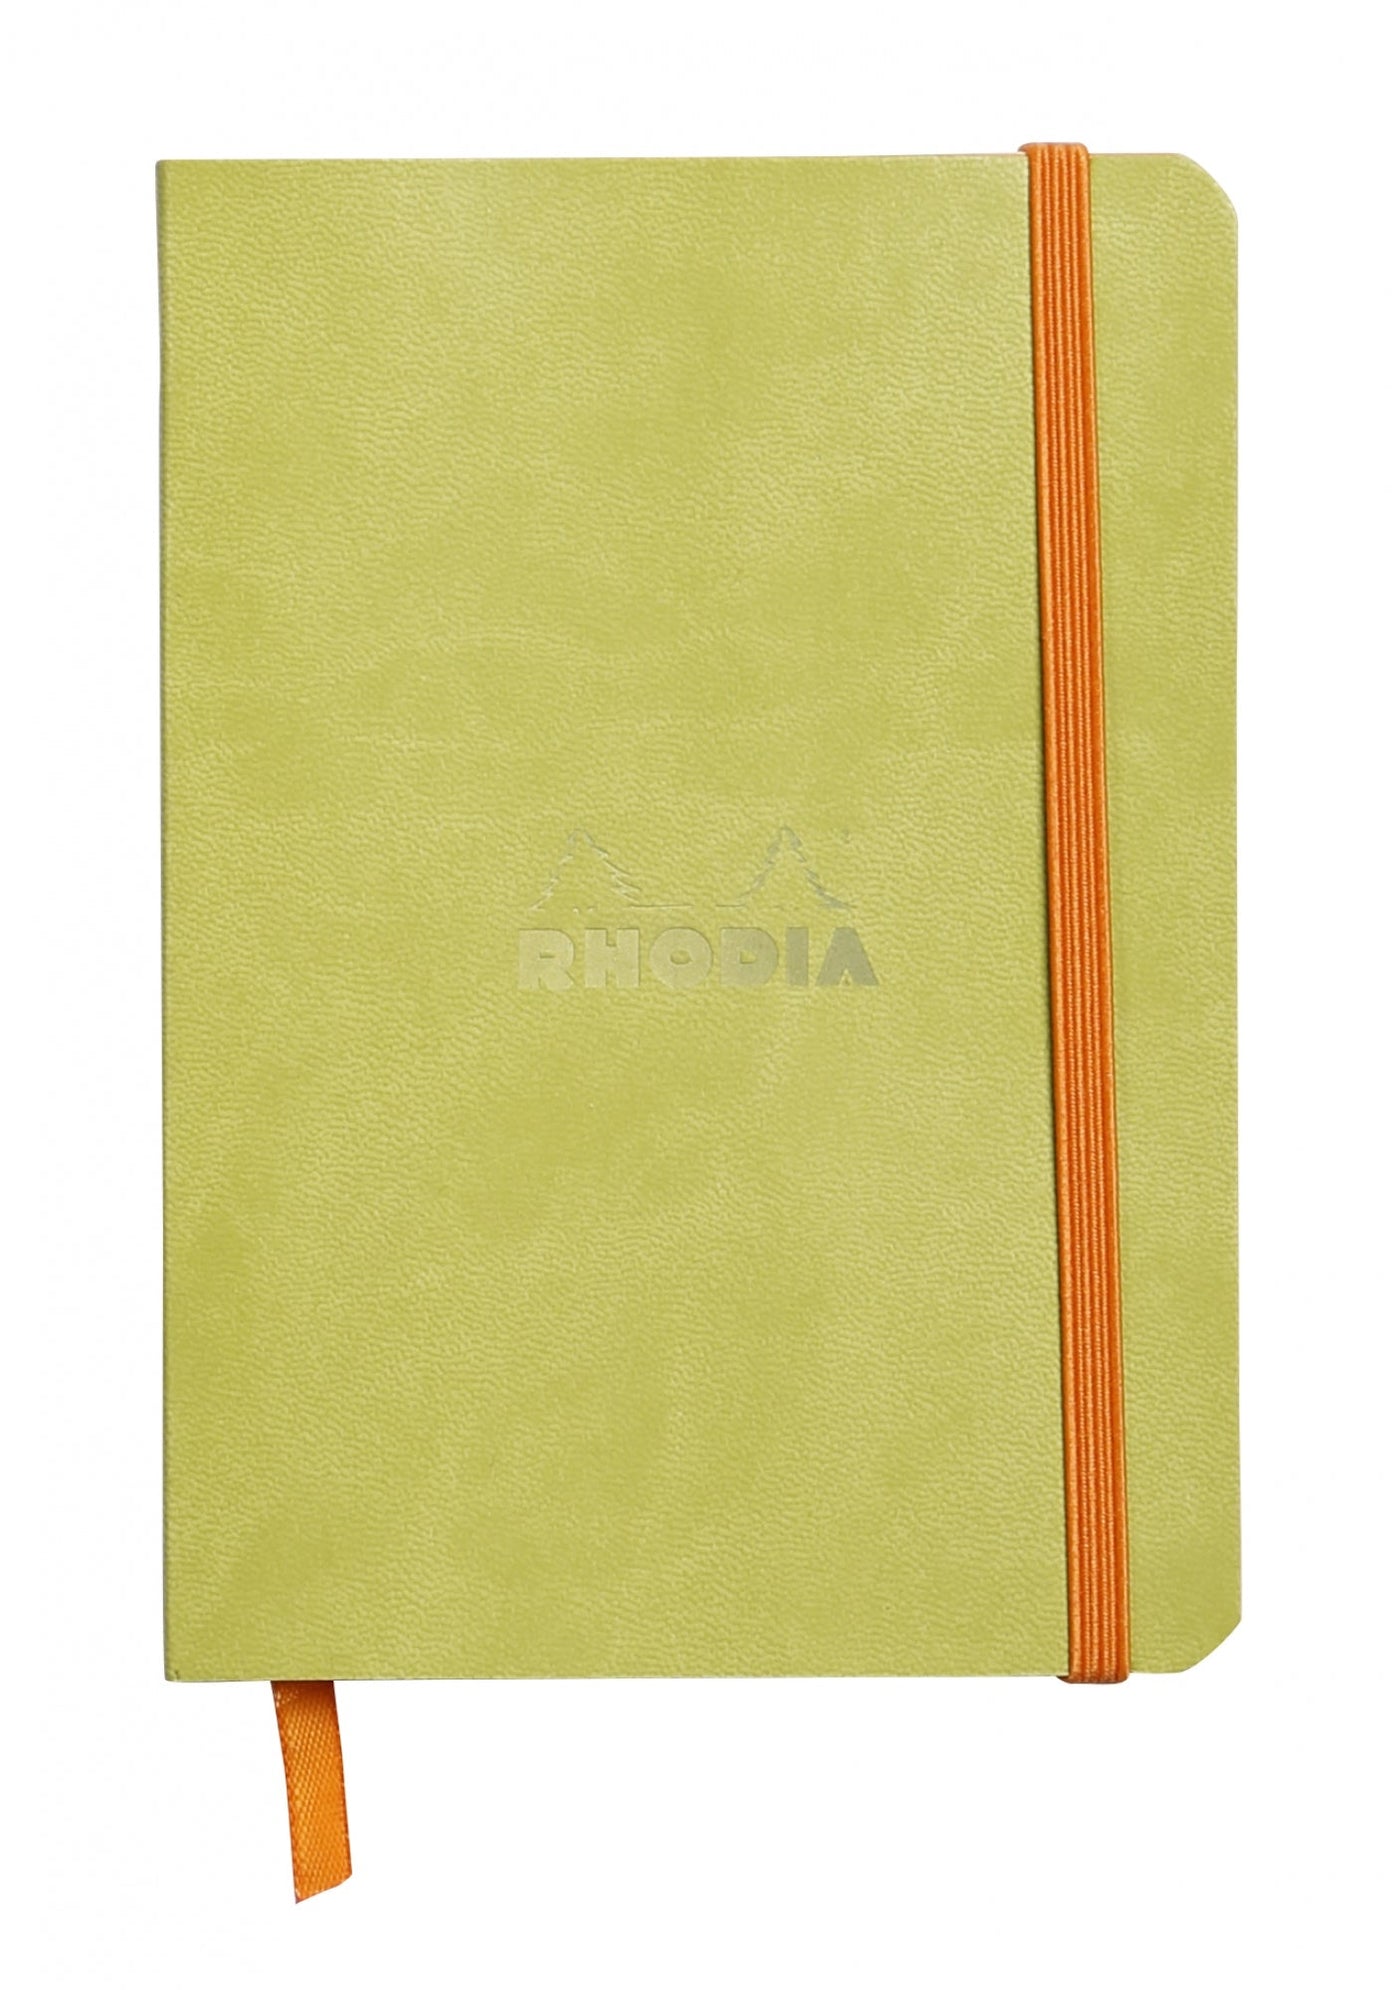 Rhodia Rhodiarama Anise A6 Soft Cover Dotted Notebook